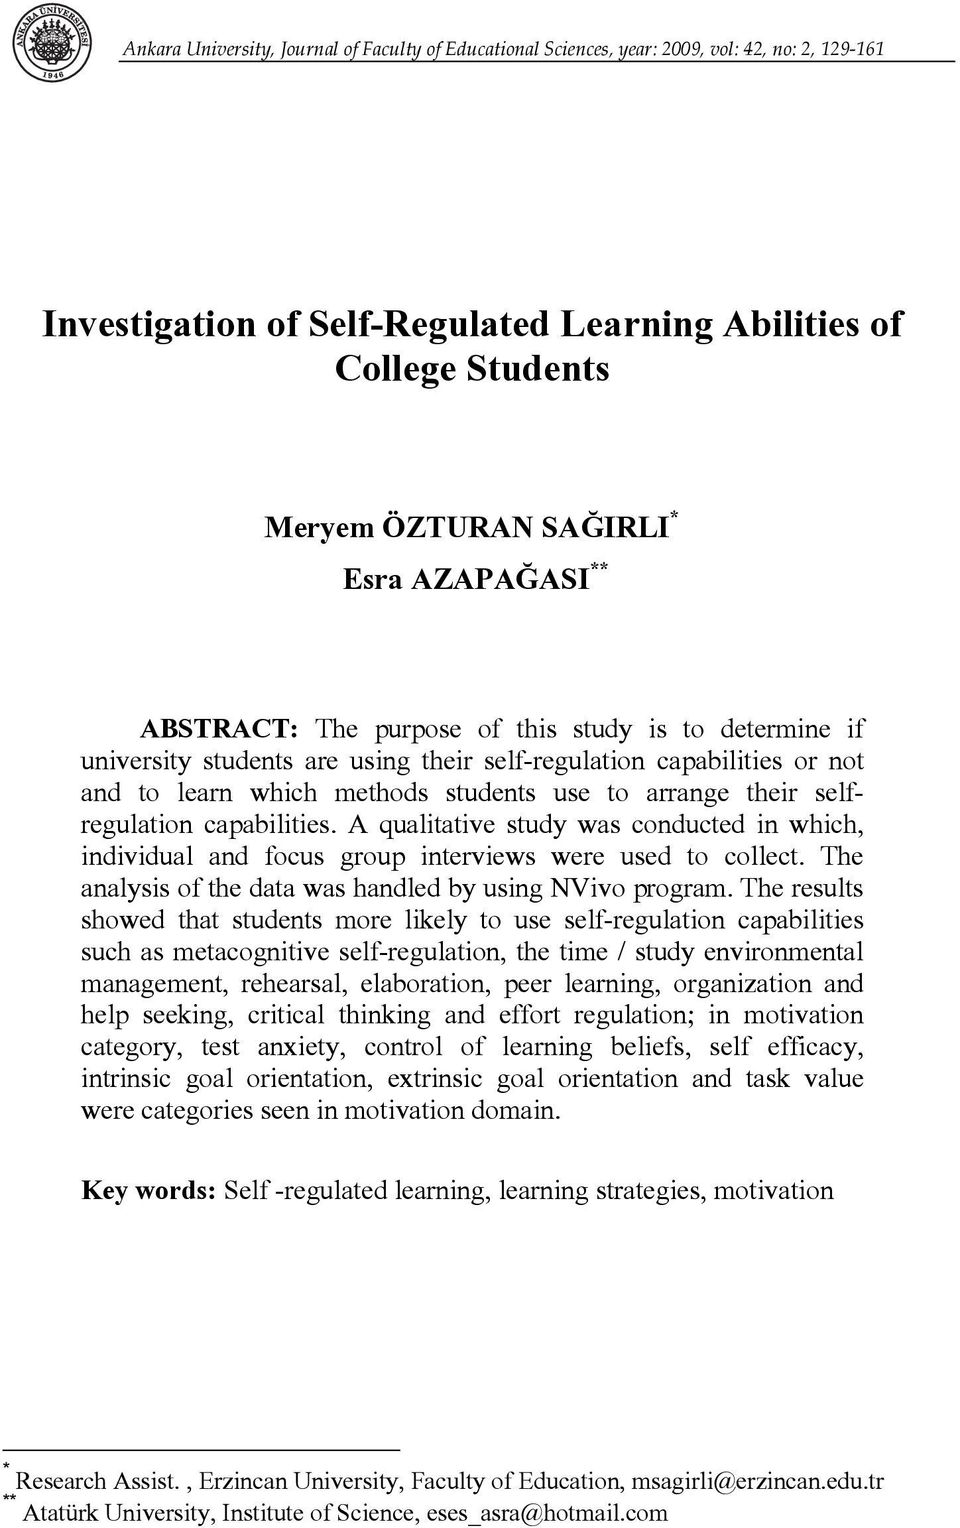 selfregulation capabilities. A qualitative study was conducted in which, individual and focus group interviews were used to collect. The analysis of the data was handled by using NVivo program.